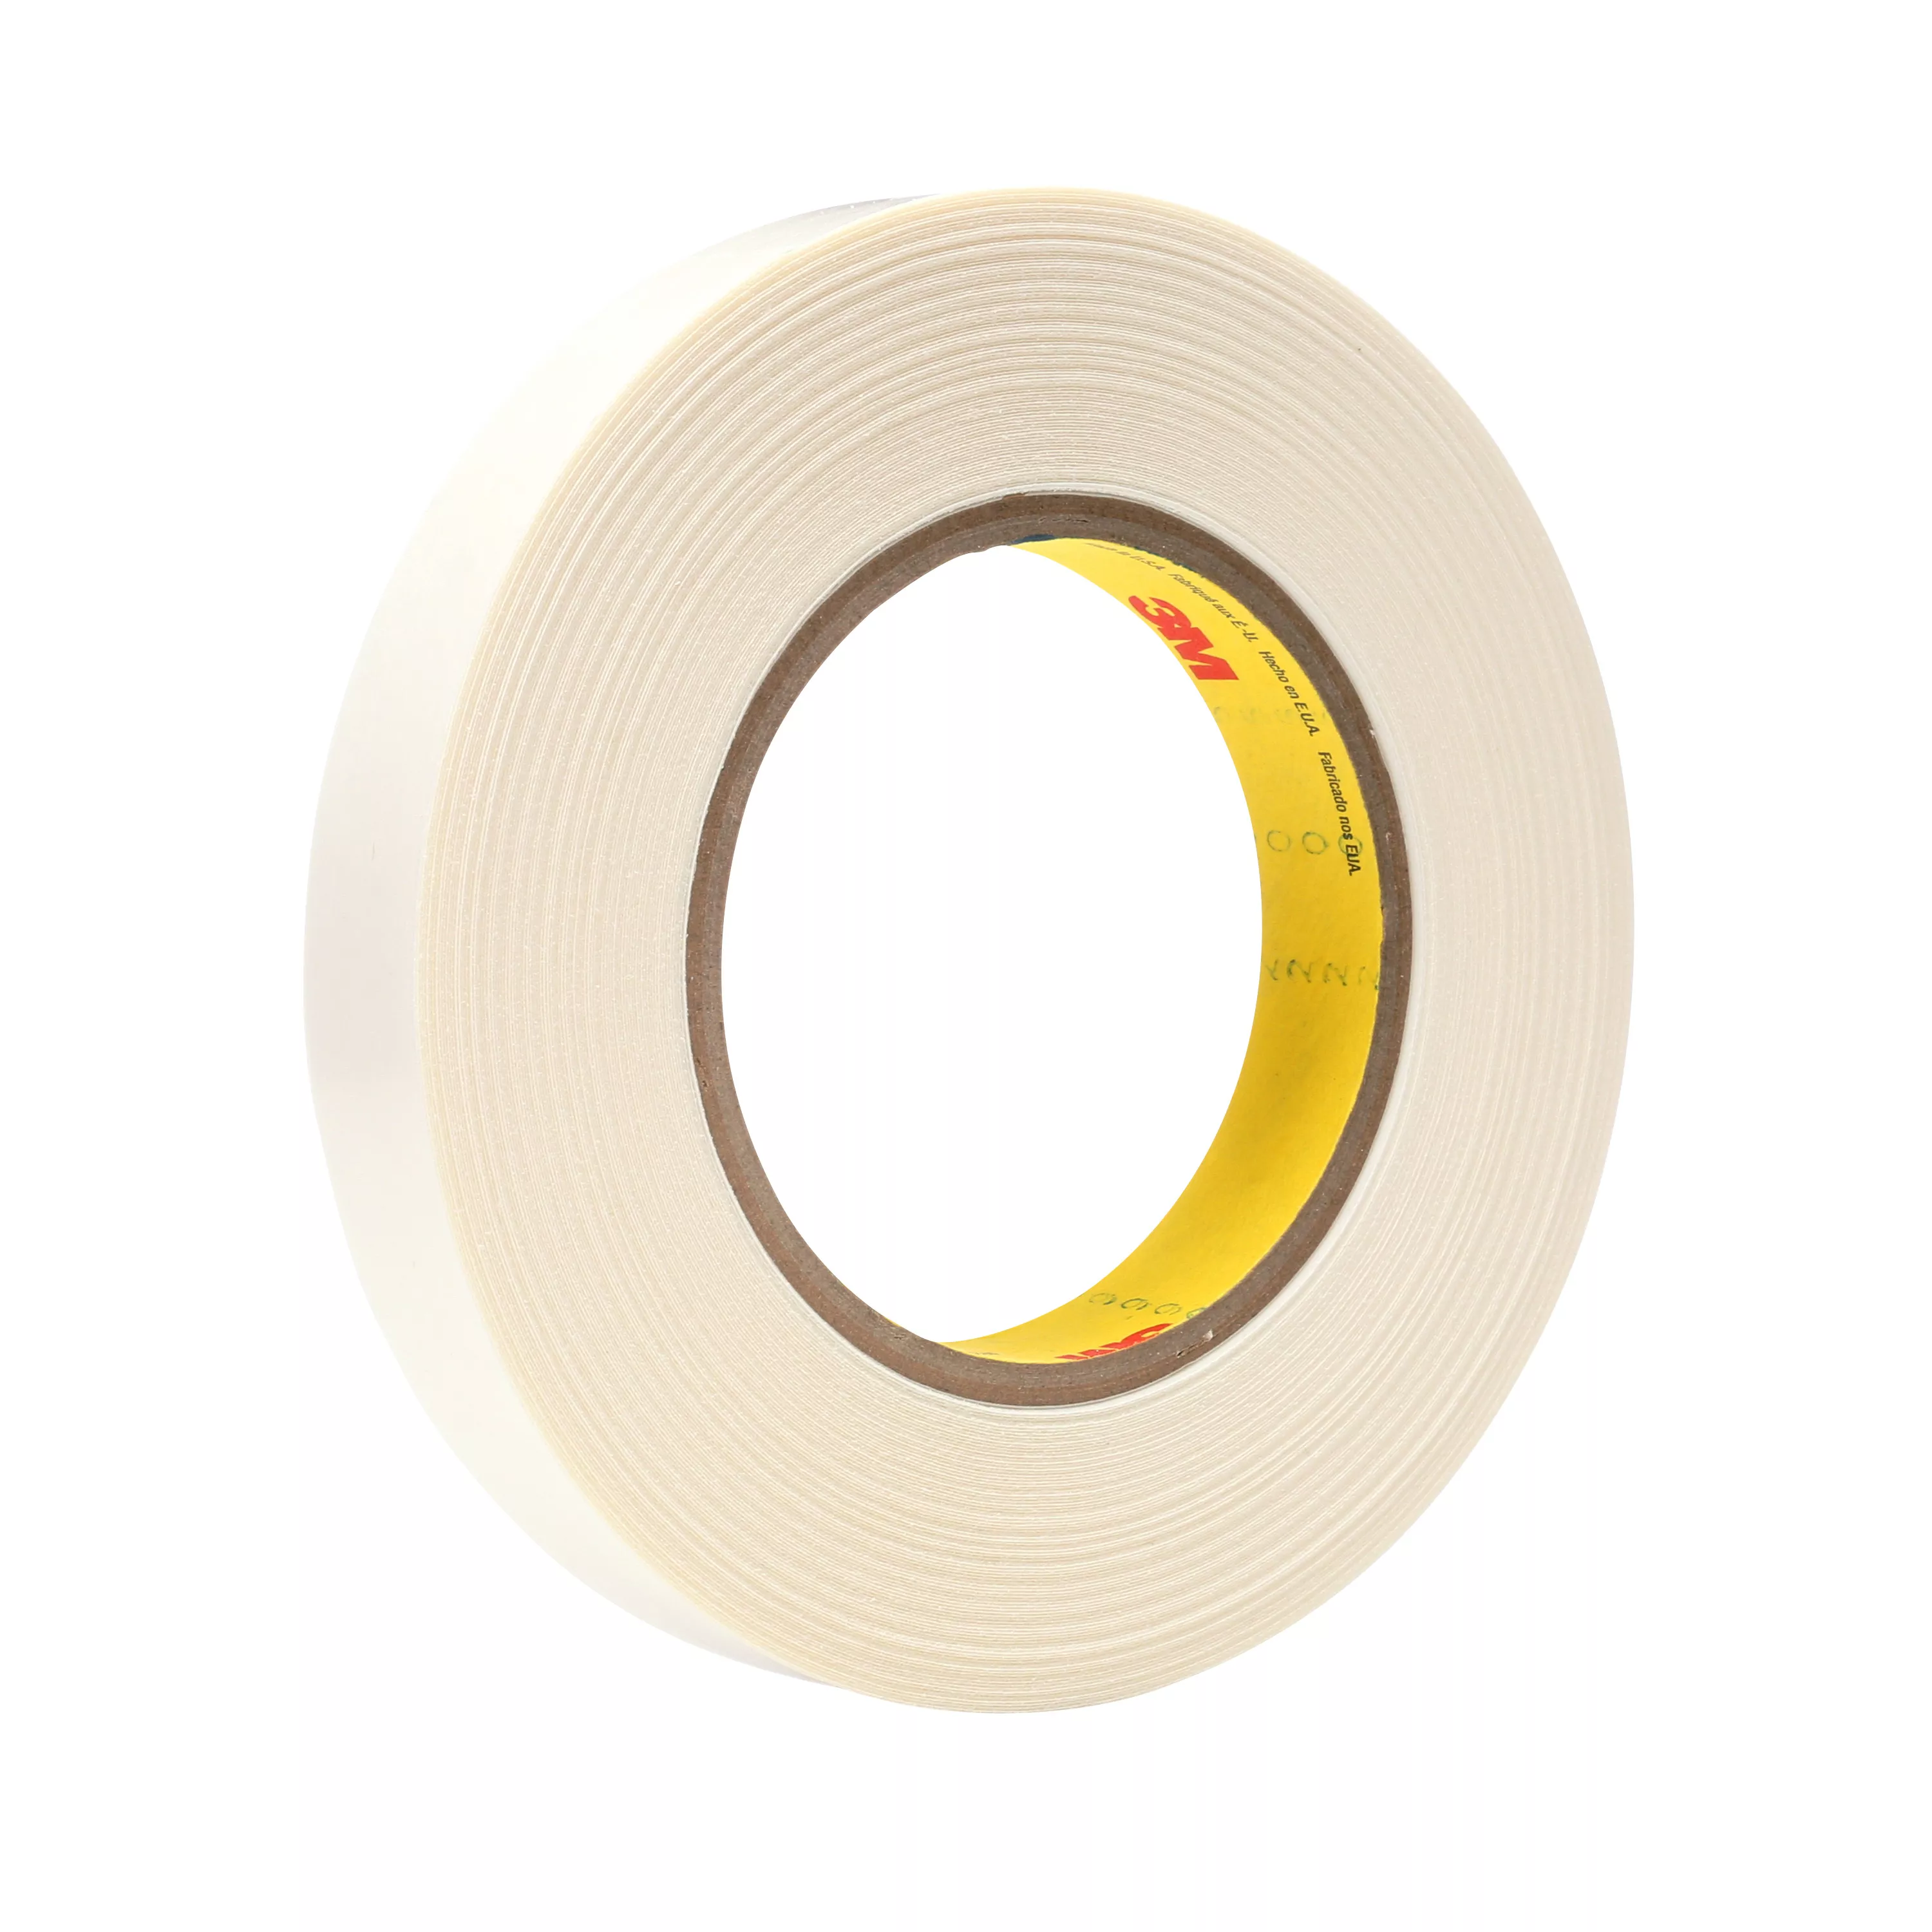 3M™ Double Coated Tape 9579, White, 3/4 in x 36 yd, 9 mil, 48 Roll/Case